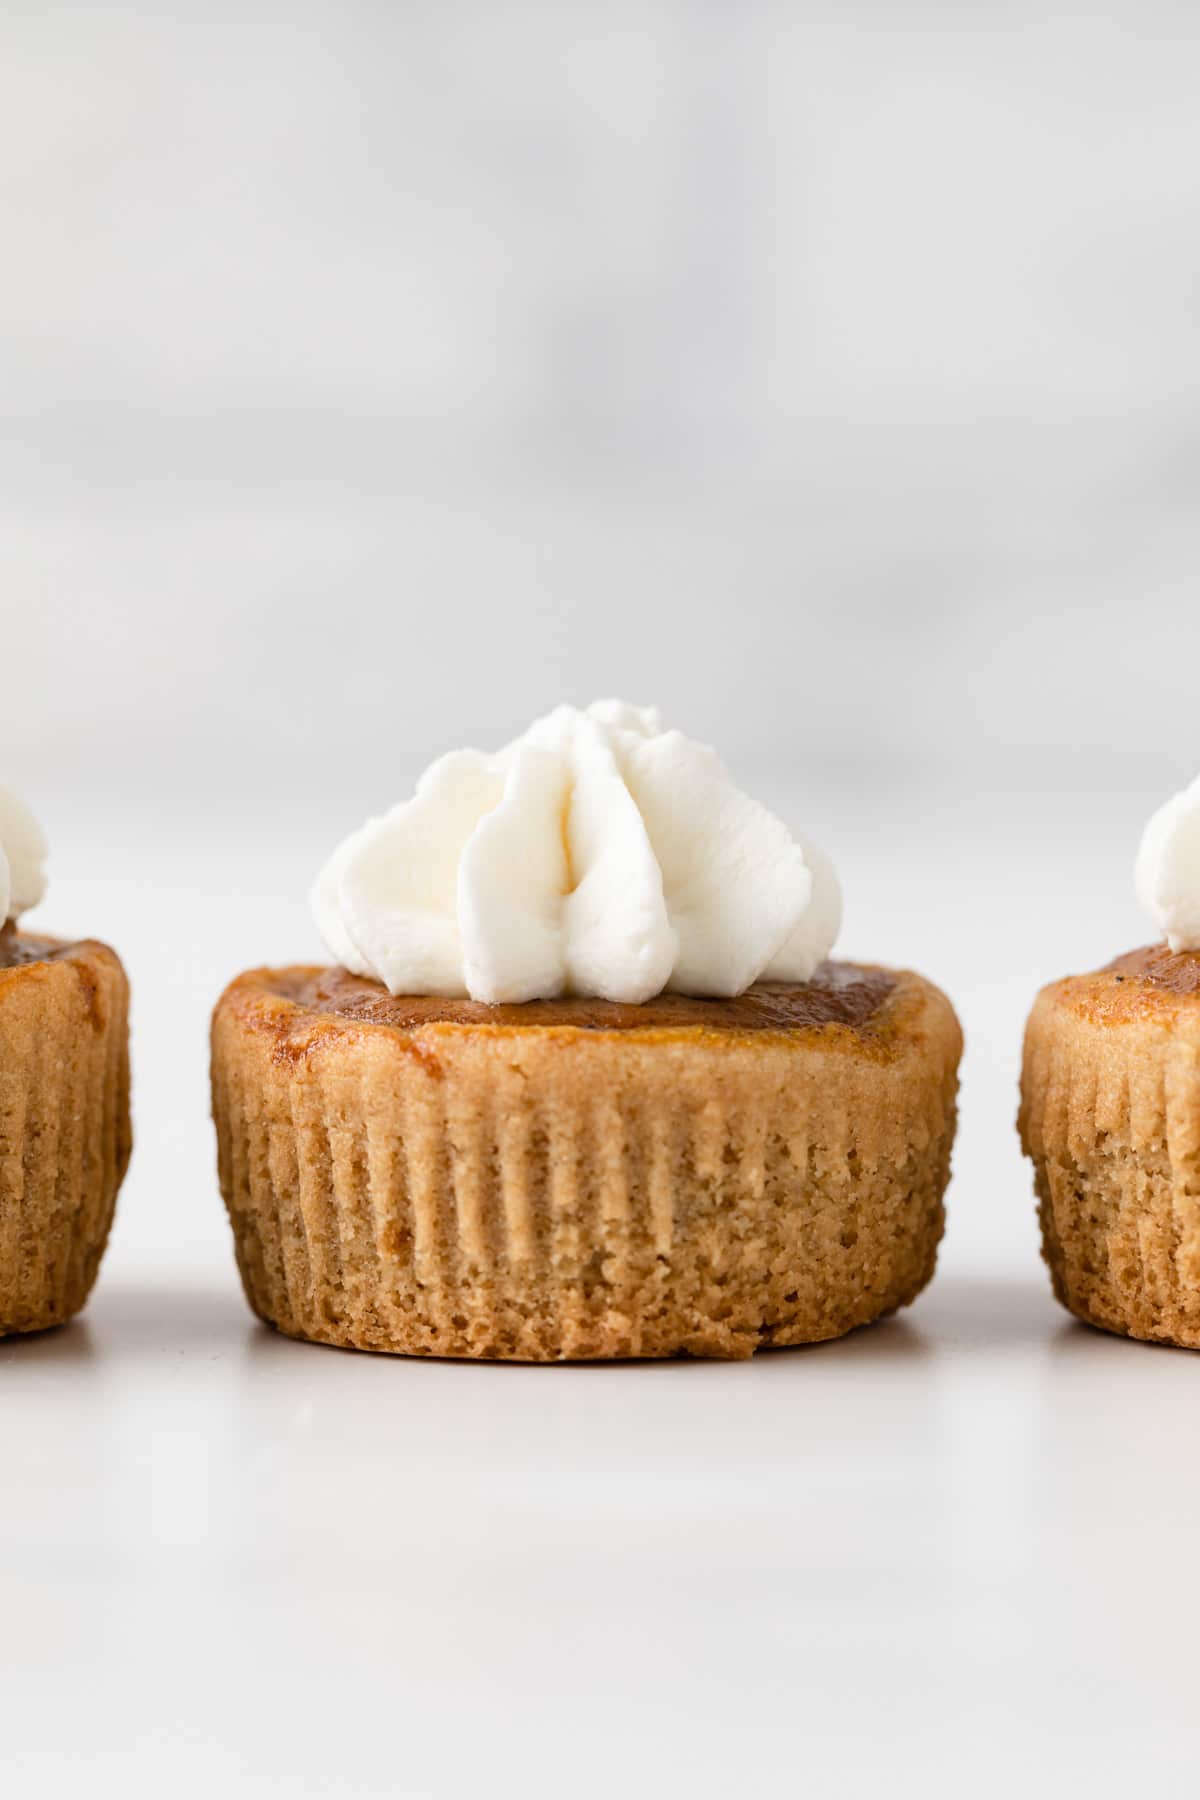 straight on view of mini pumpkin pie topped with whipped cream